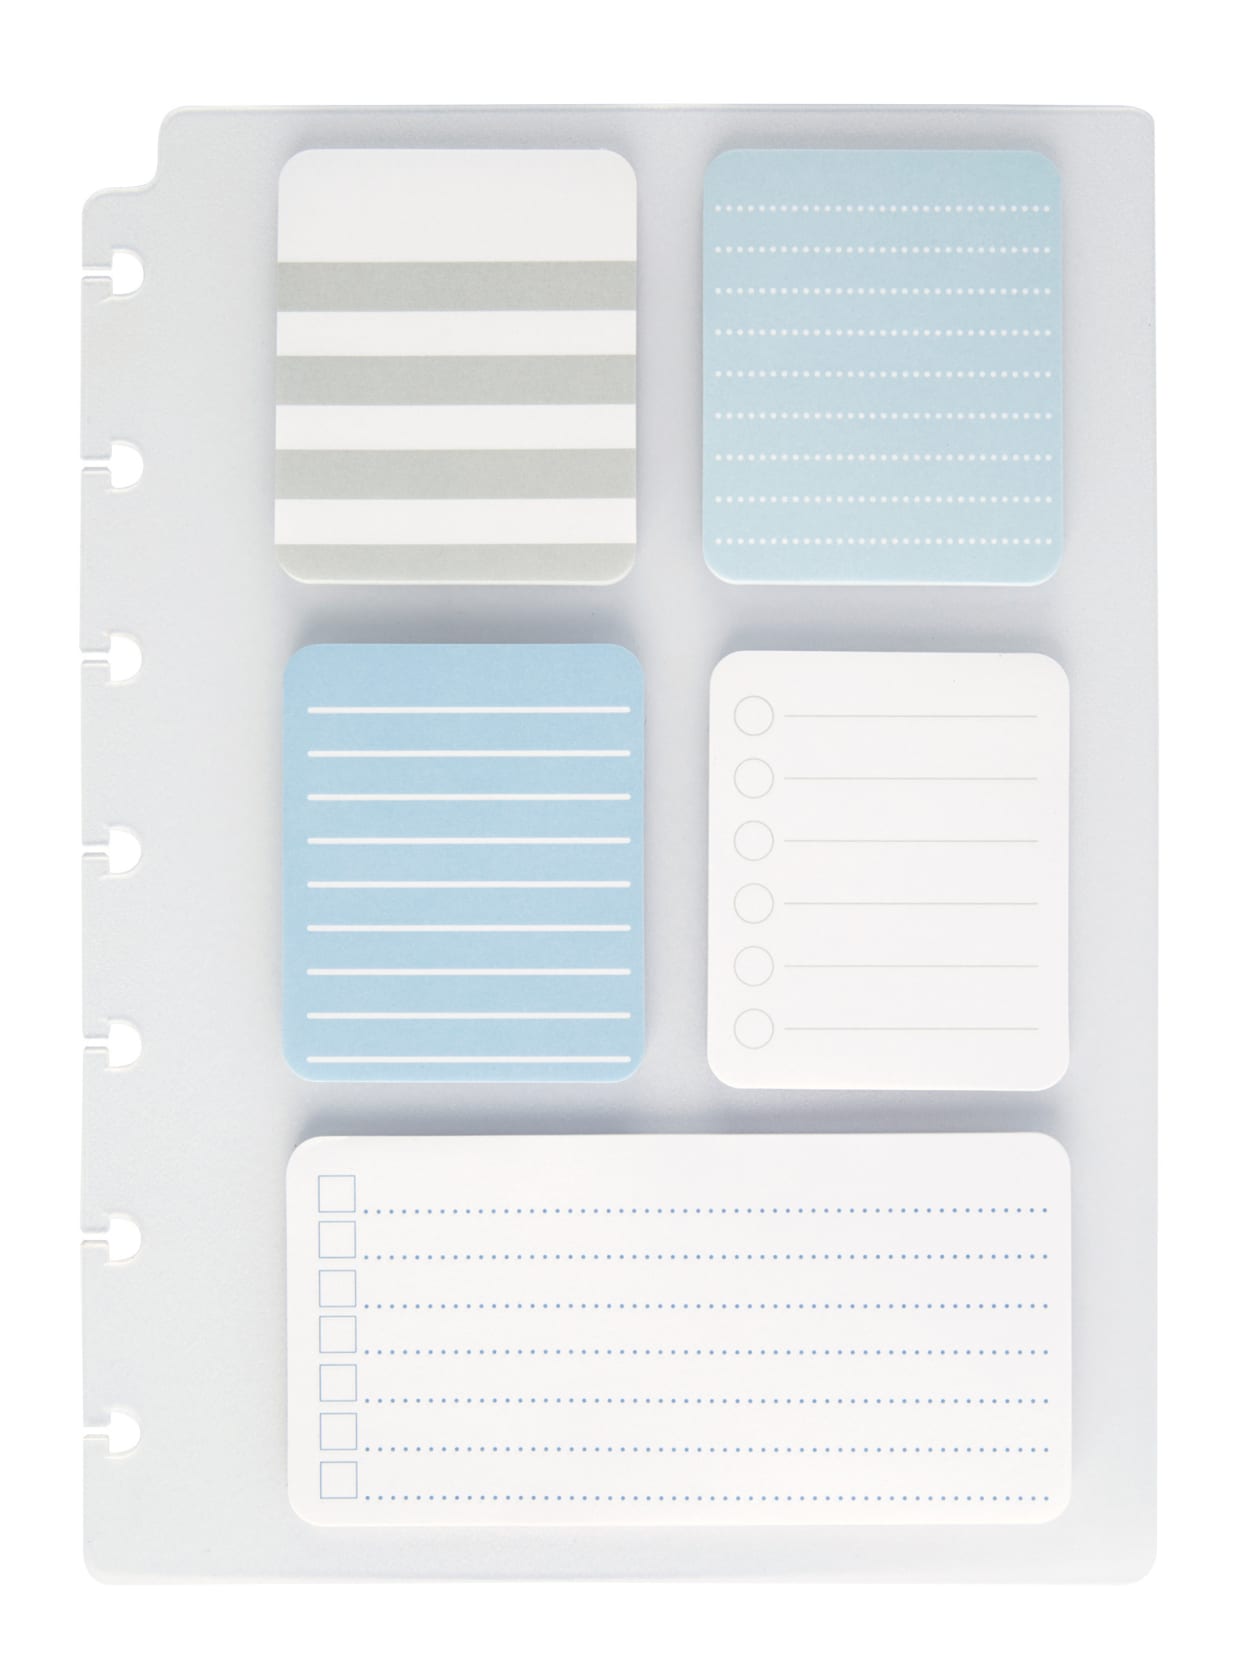 Tul Discbound Lined Sticky Note Pads Assorted Colors 25 Sheets Per Pad 1 Dashboard Of 5 Assorted Pads Office Depot